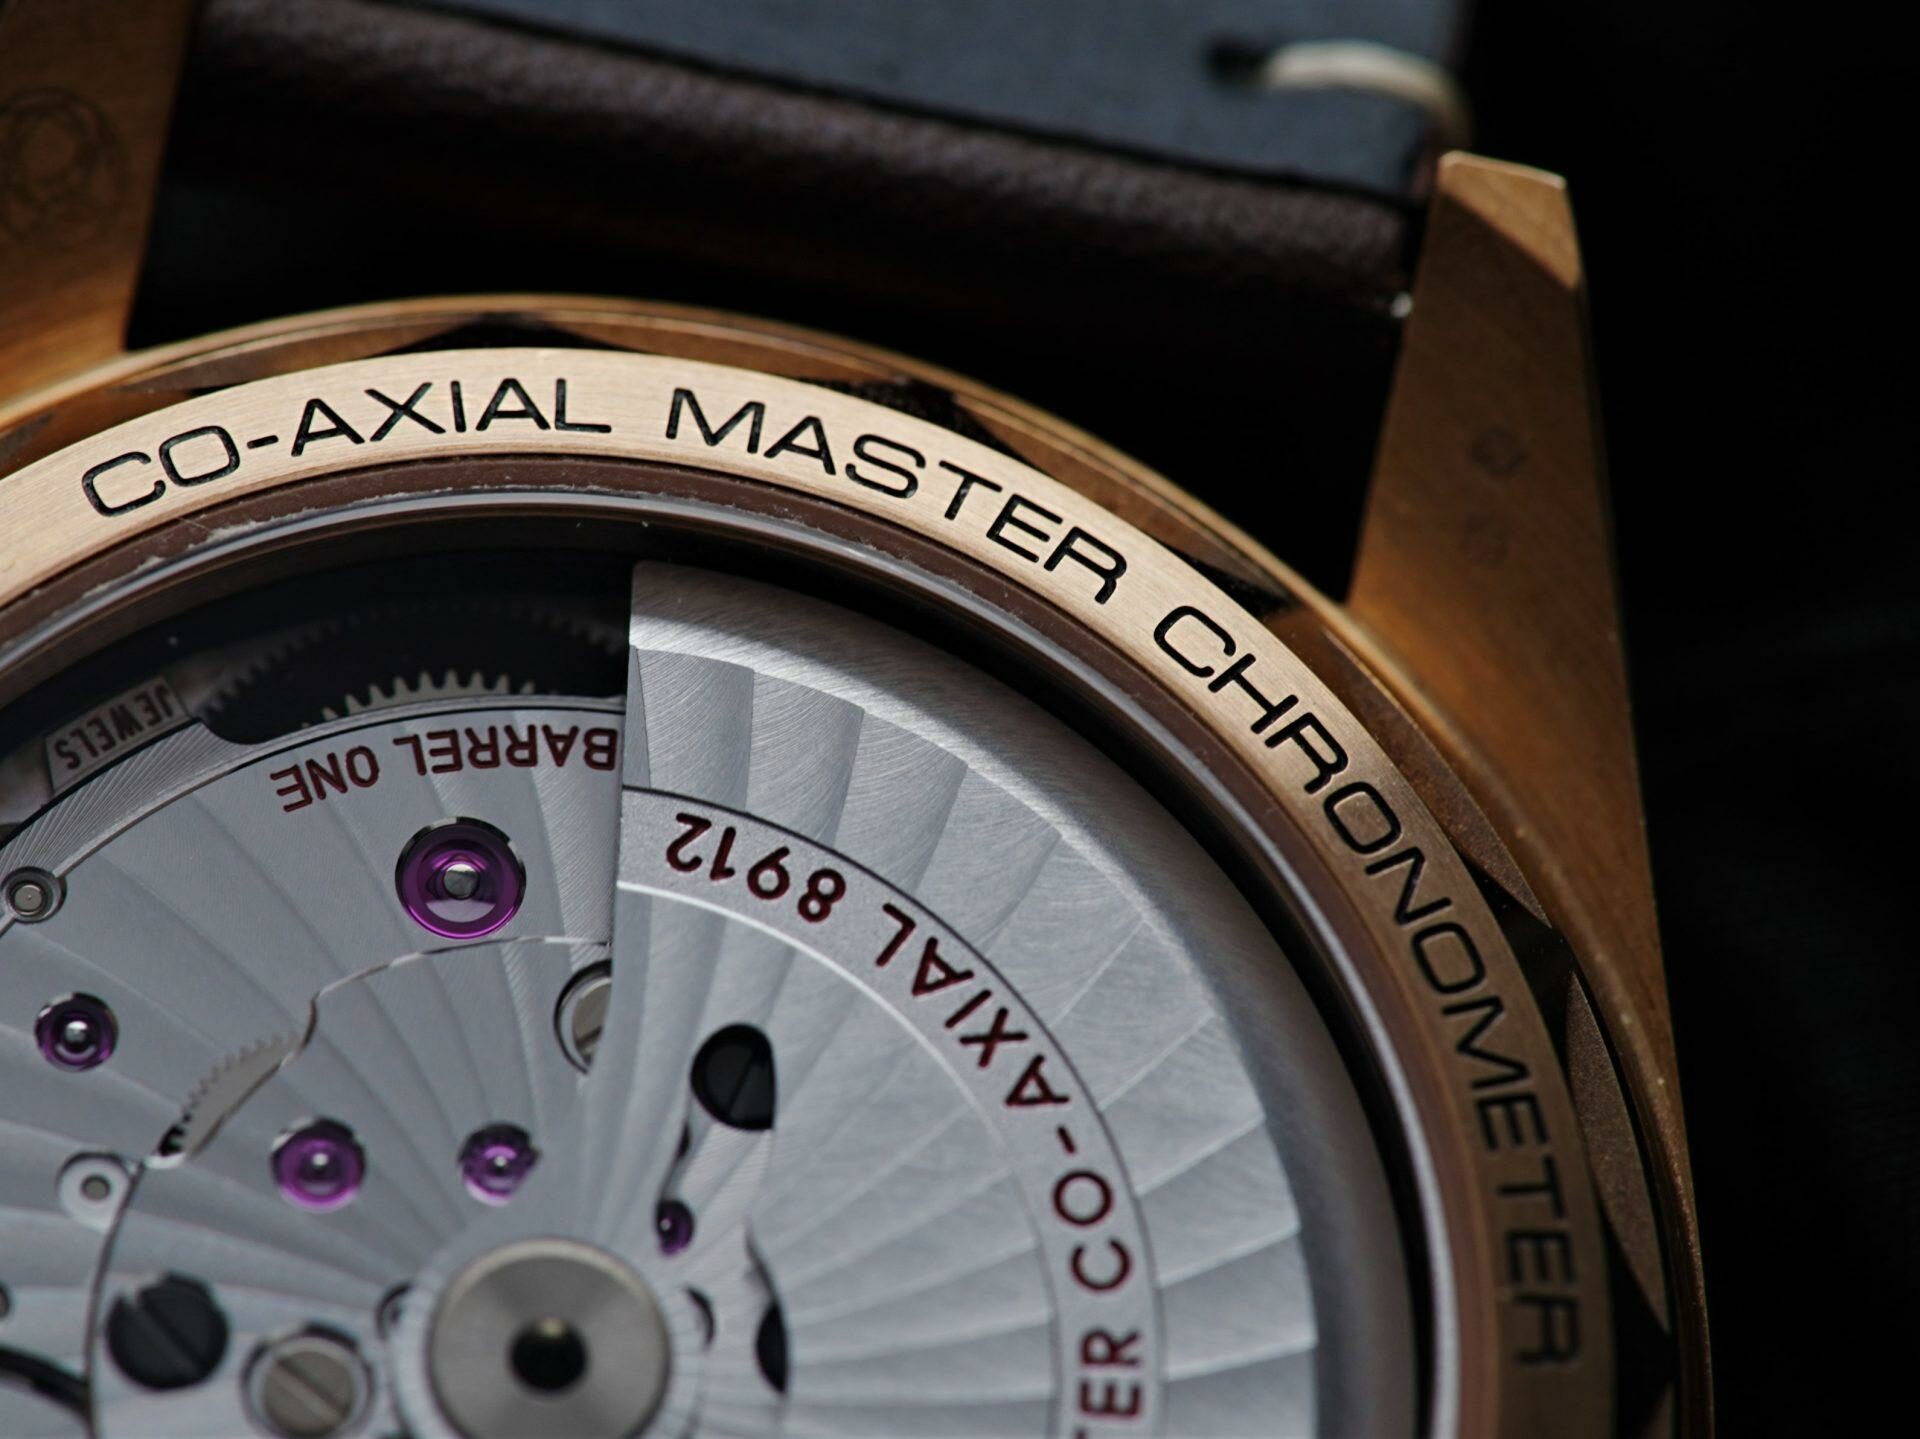 Back side of the Omega Seamaster 300 Co-Axial Master Chronometer watch showing the movement.